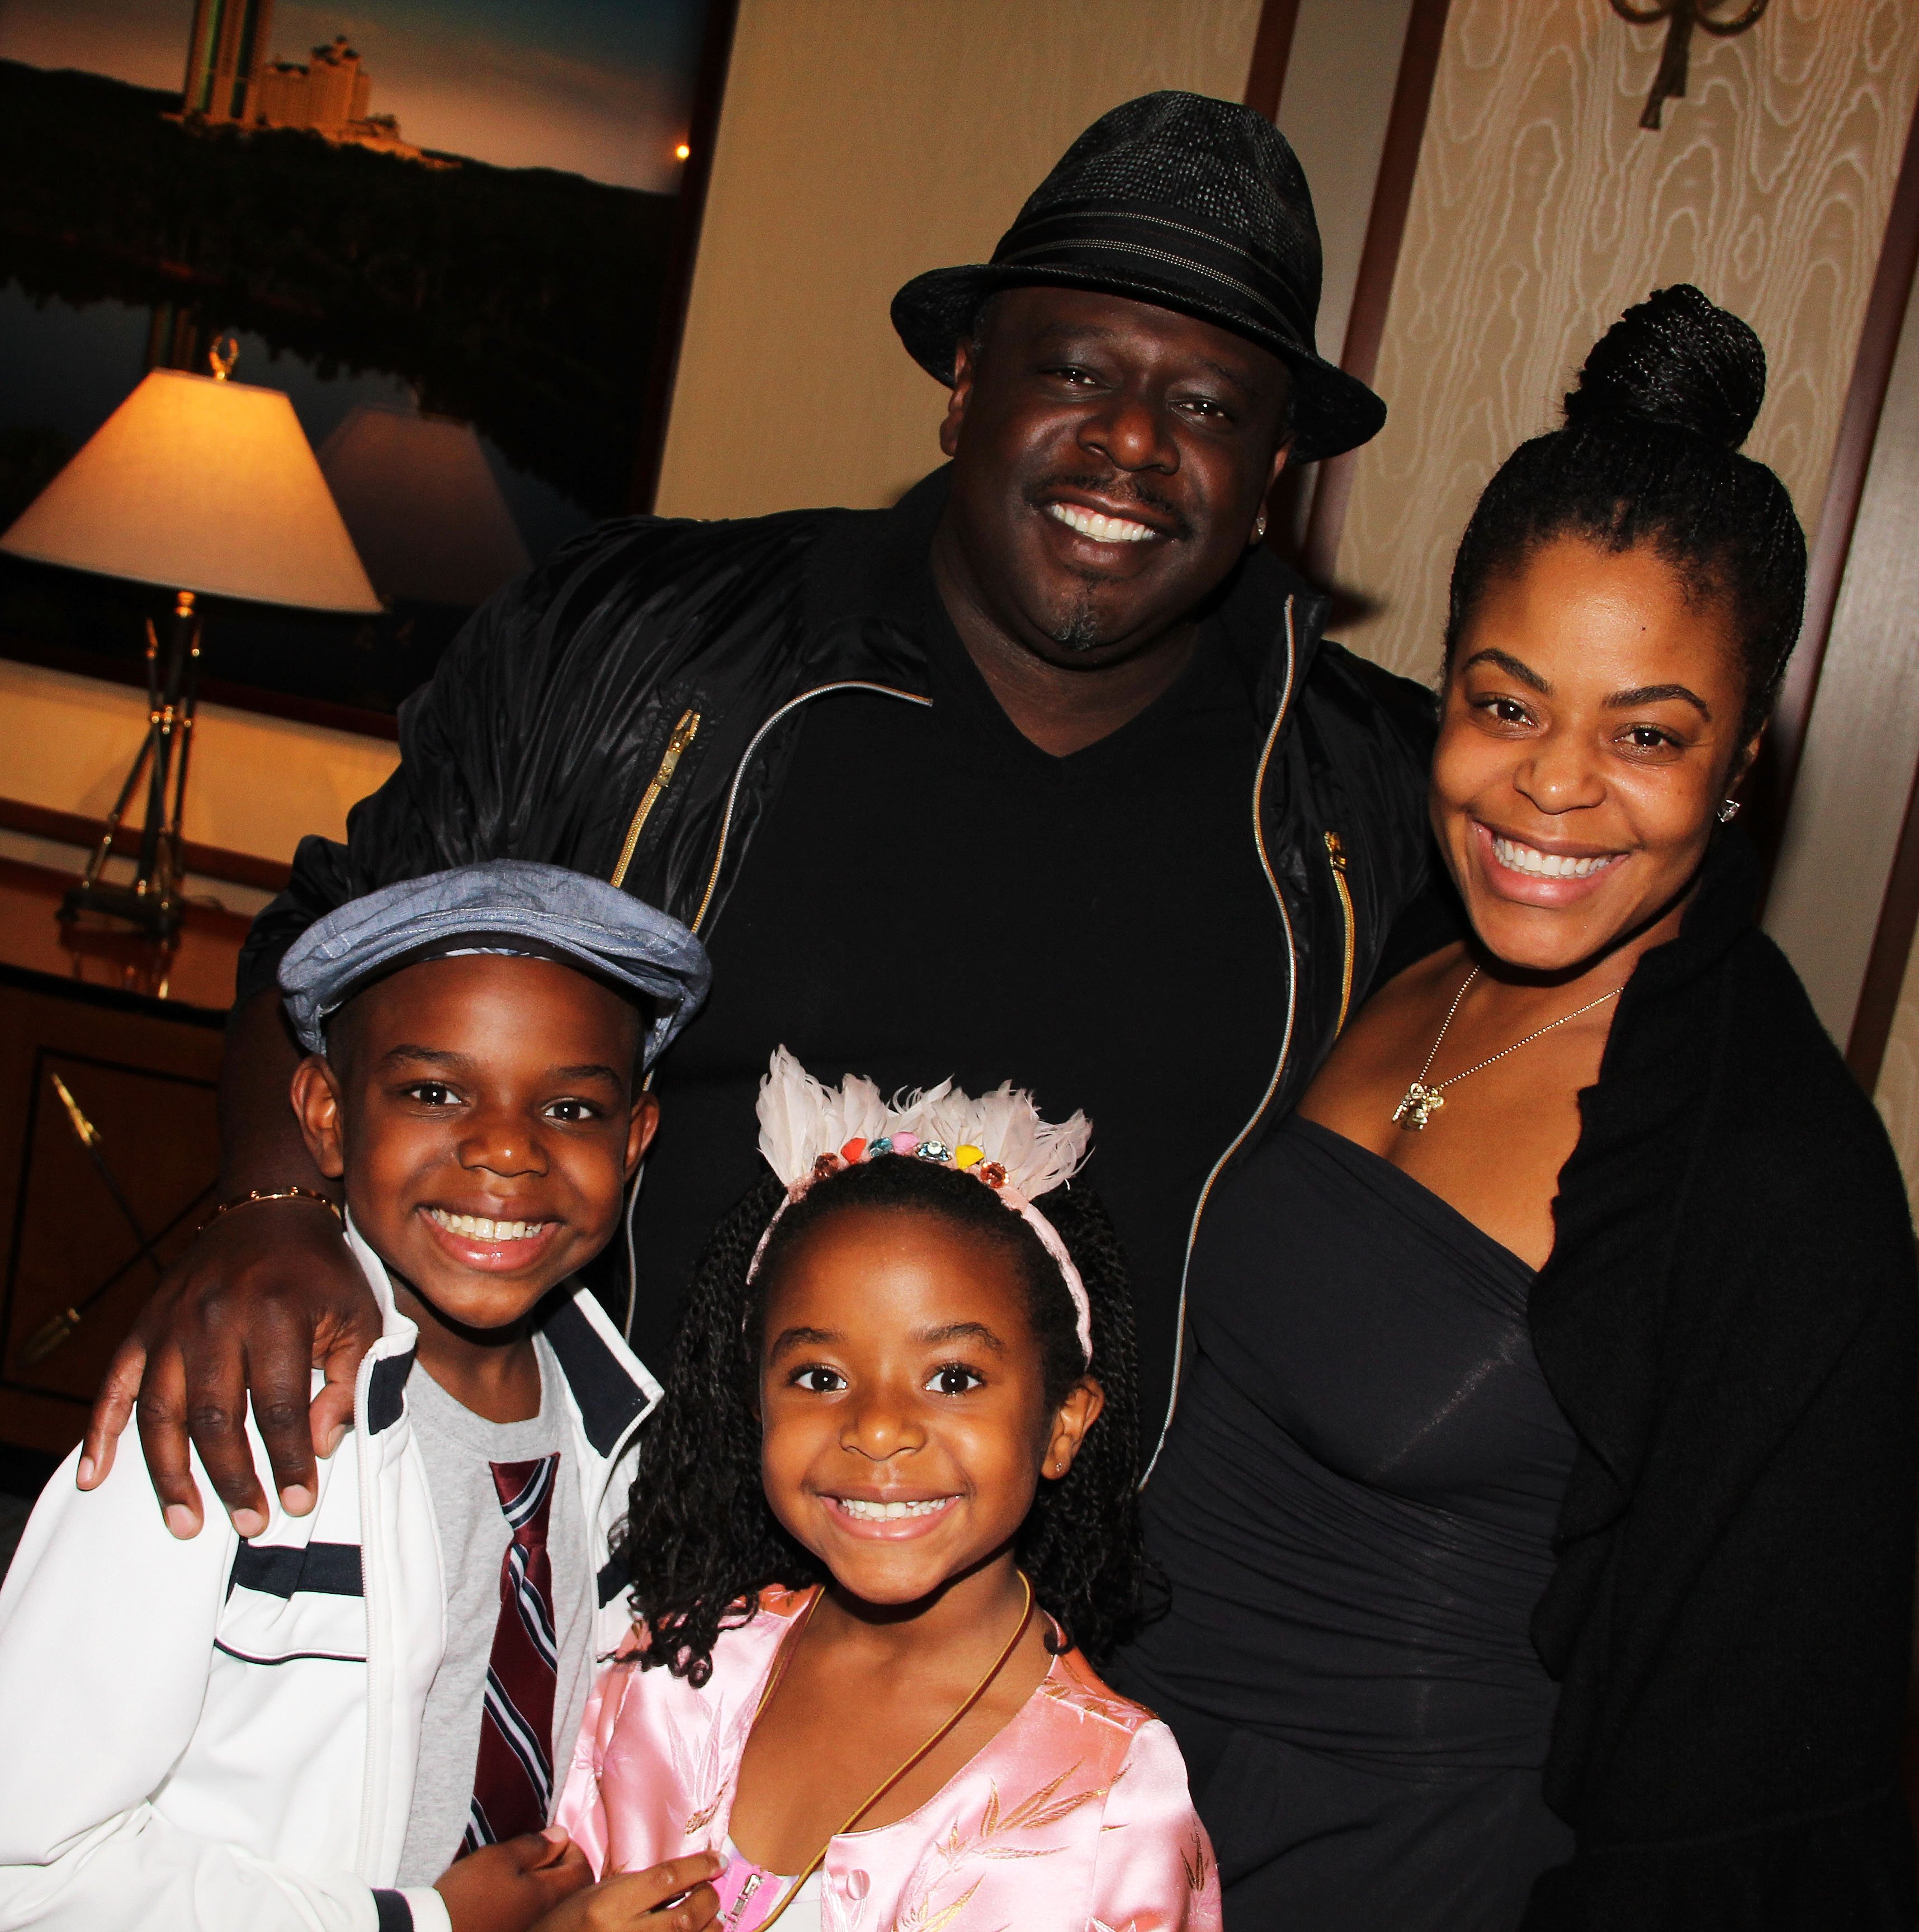 Croix Alexander Kyles and Lucky Rose Kyles with their parents, Cedric the Entertainer and Lorna Wells, at the broadway musical of "Spider-Man: Turn Off The Dark," at The Foxwood Theater in New York City, on July 29, 2011. | Source: Getty Images